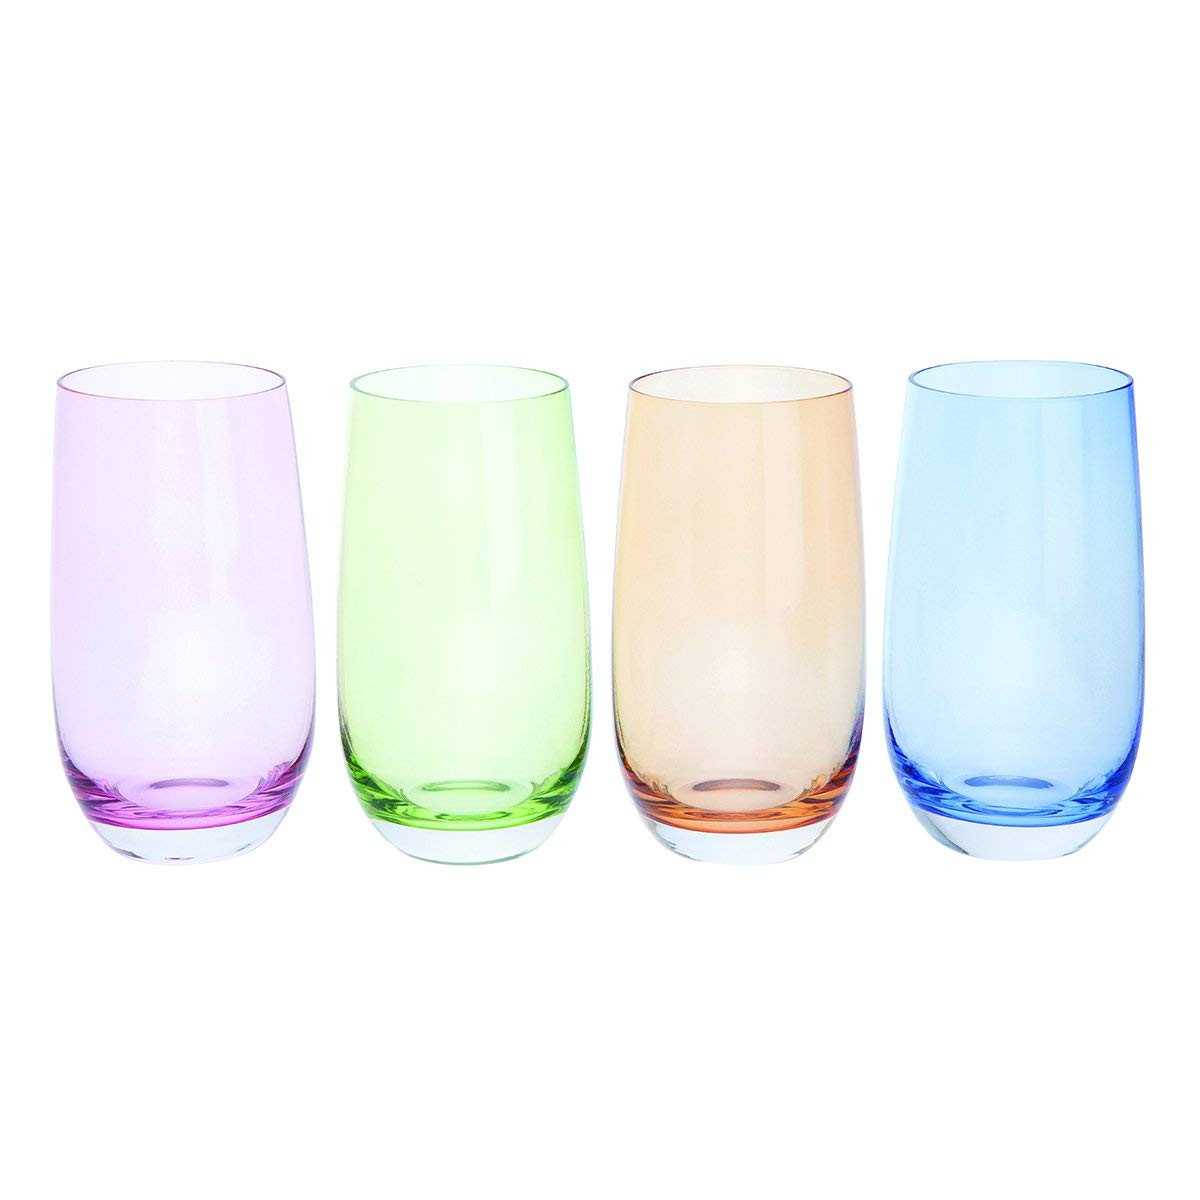 28 Amazing Waterford Crystal Vase Small 2024 free download waterford crystal vase small of dartington crystal tall large seahorse glass vase wedding home party intended for pack of 4 dartington crystal spangle highball coloured drinking glasses 490m